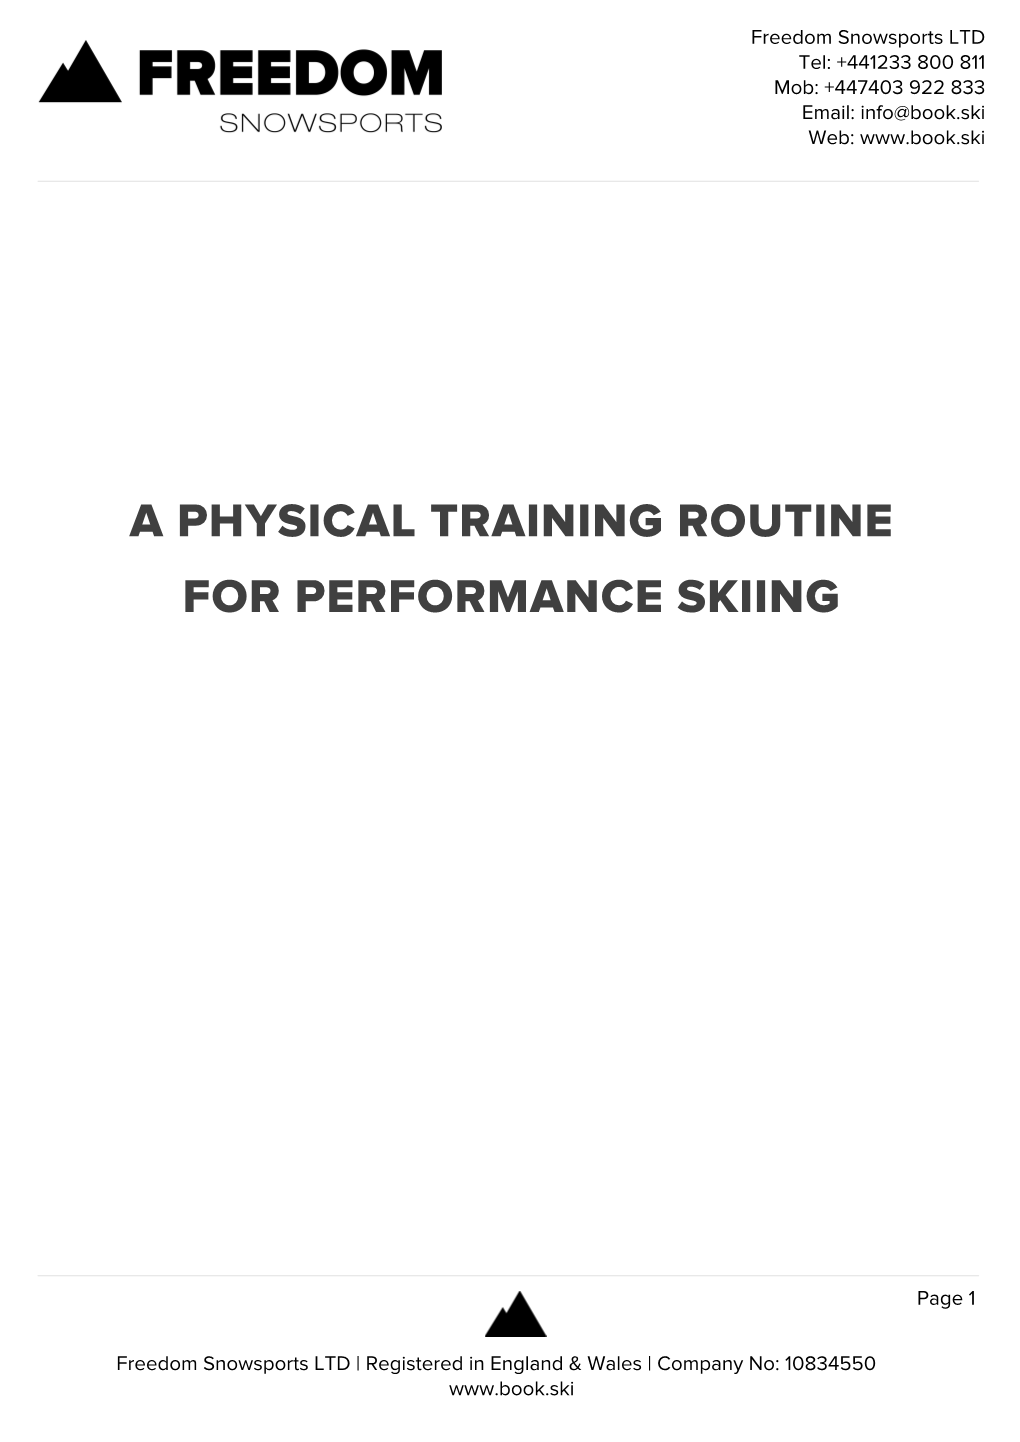 A Physical Training Routine for Skiers